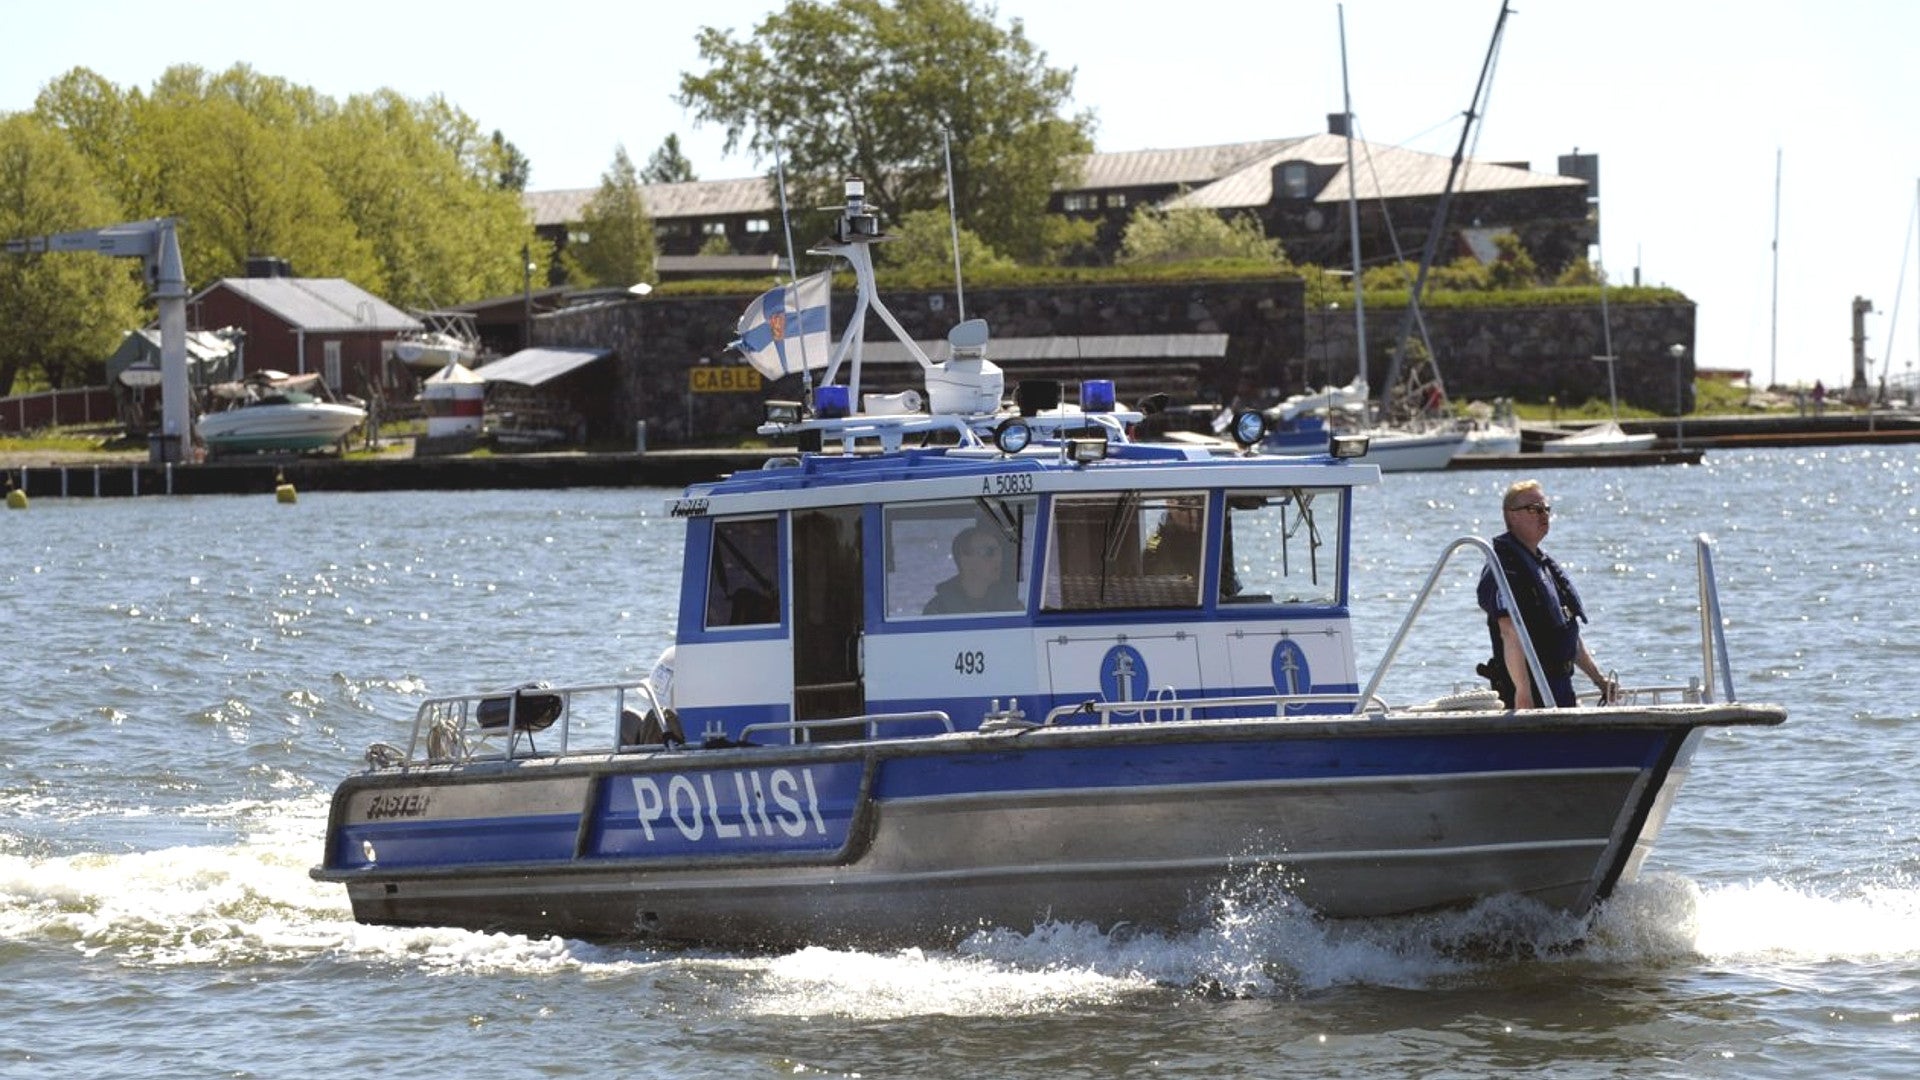 Rumors of Covert Russian Ops Swirl After Finland’s Police Raid Bond-Esque Private Island